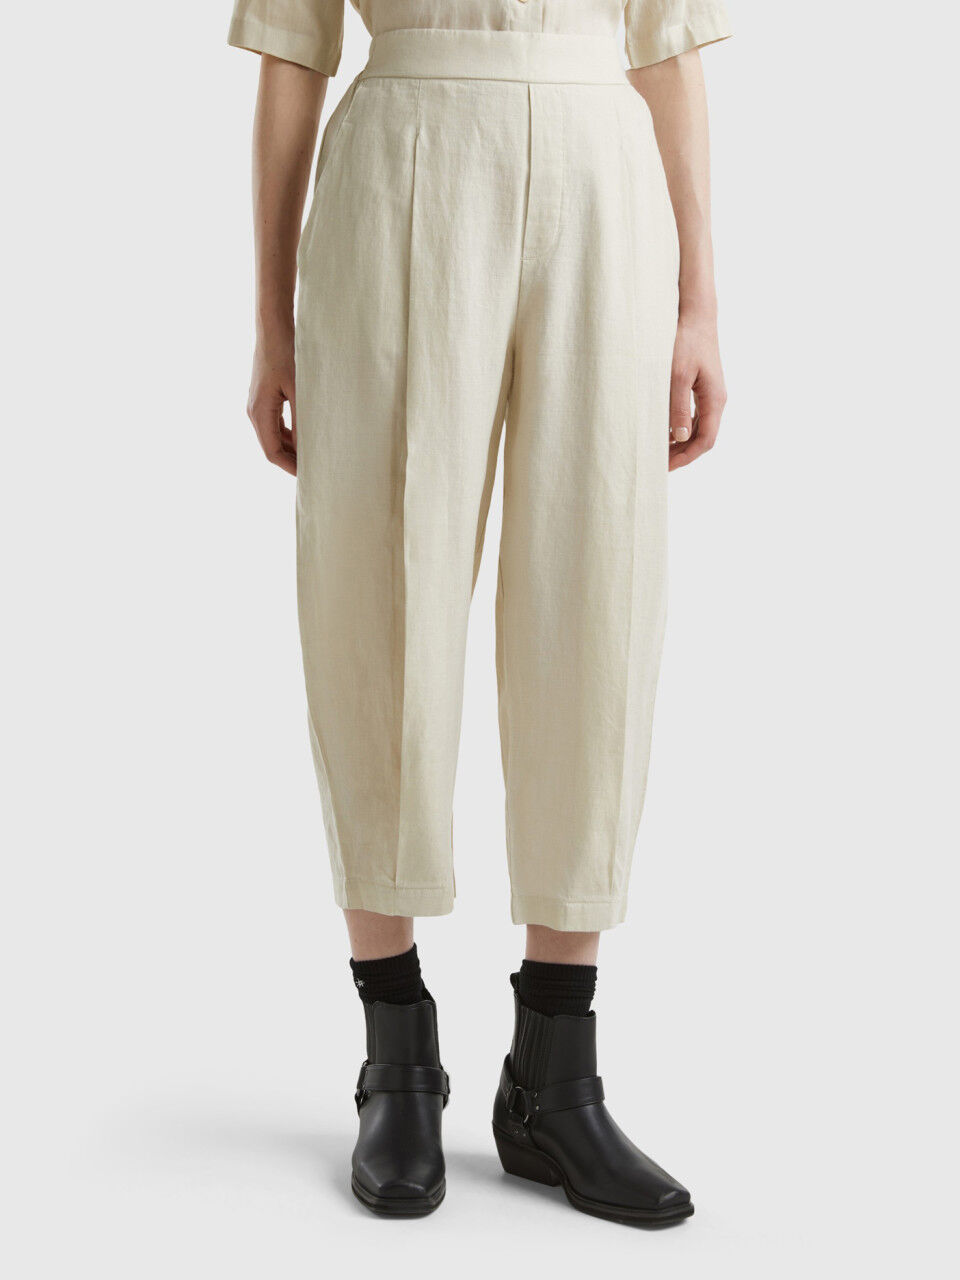 Printed Linen Trousers - Ivory, Abstract Bloom | Boden UK | Printed linen  pants, Wide leg linen trousers, Wide leg linen pants